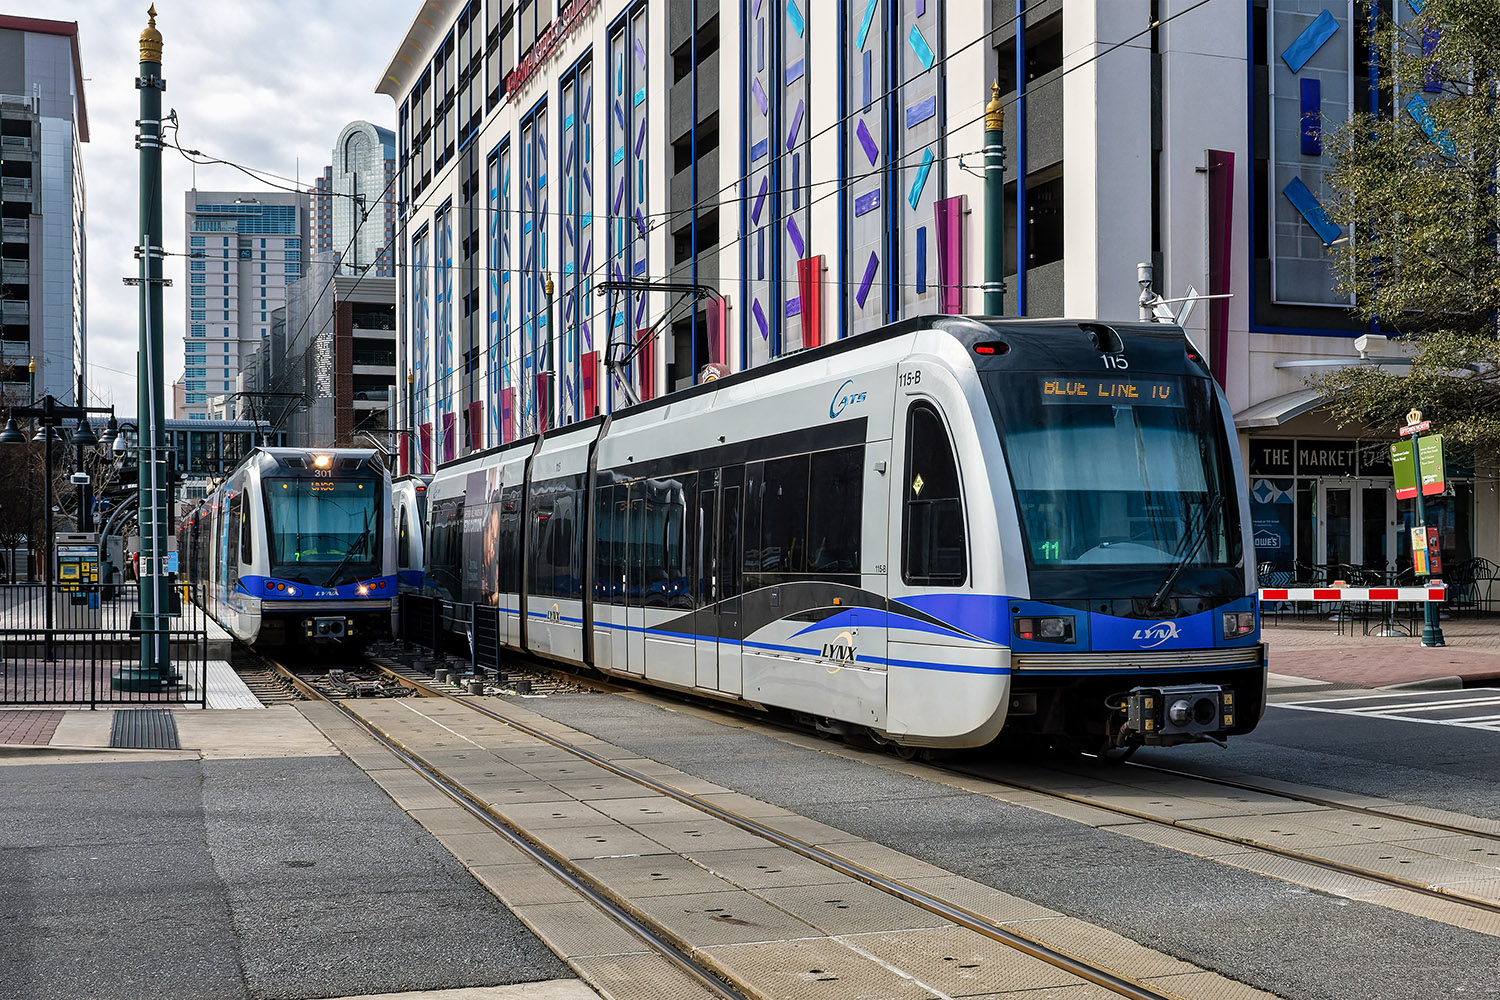 The trams of the Charlotte Light Rail Transit are modern and comfortable